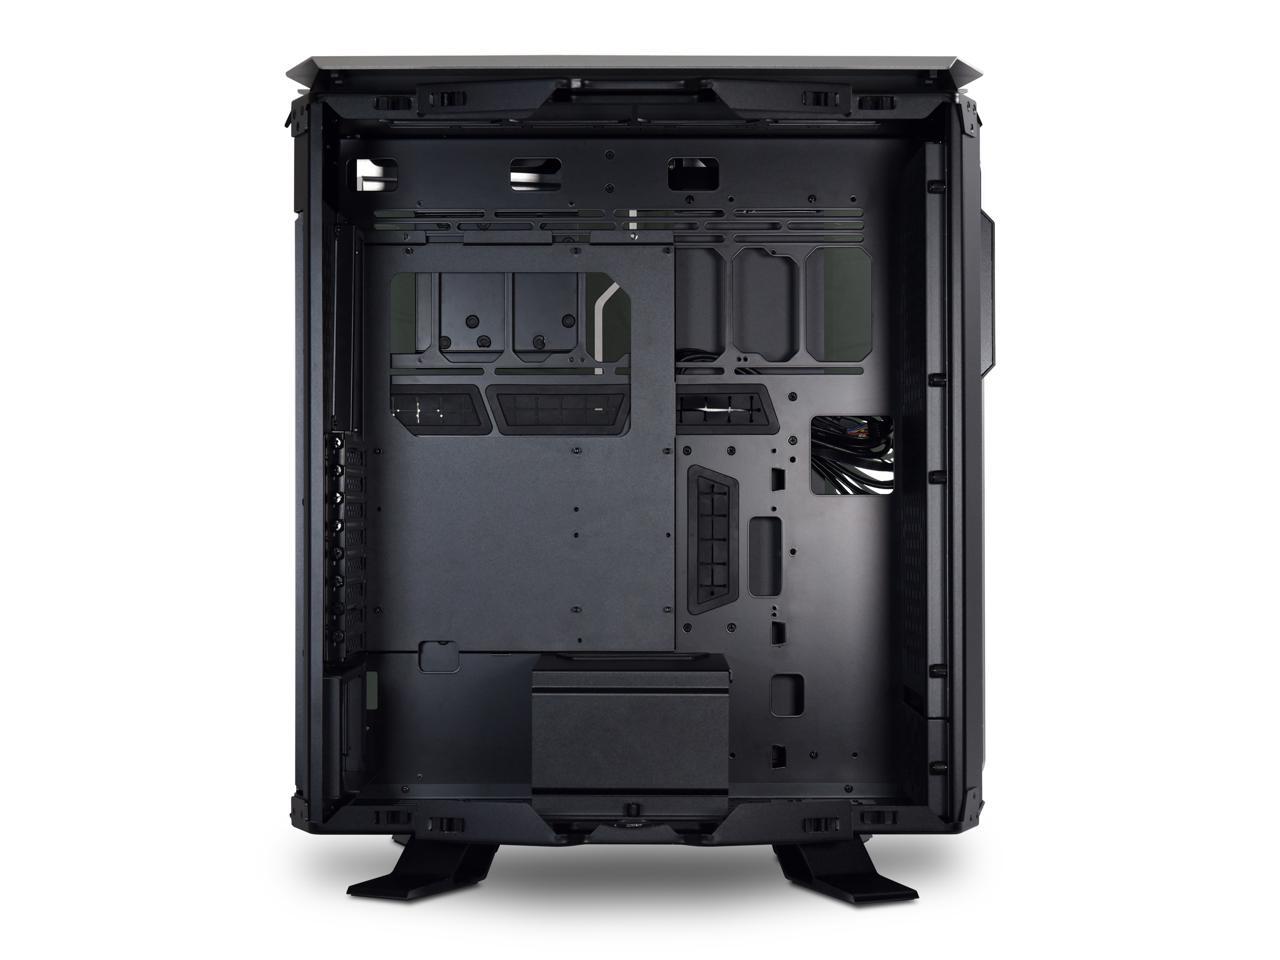 LIAN LI Odyssey X Black Tempered Glass on the Left and Right Sides, Aluminum Full Tower Gaming Computer Case - TR-01X